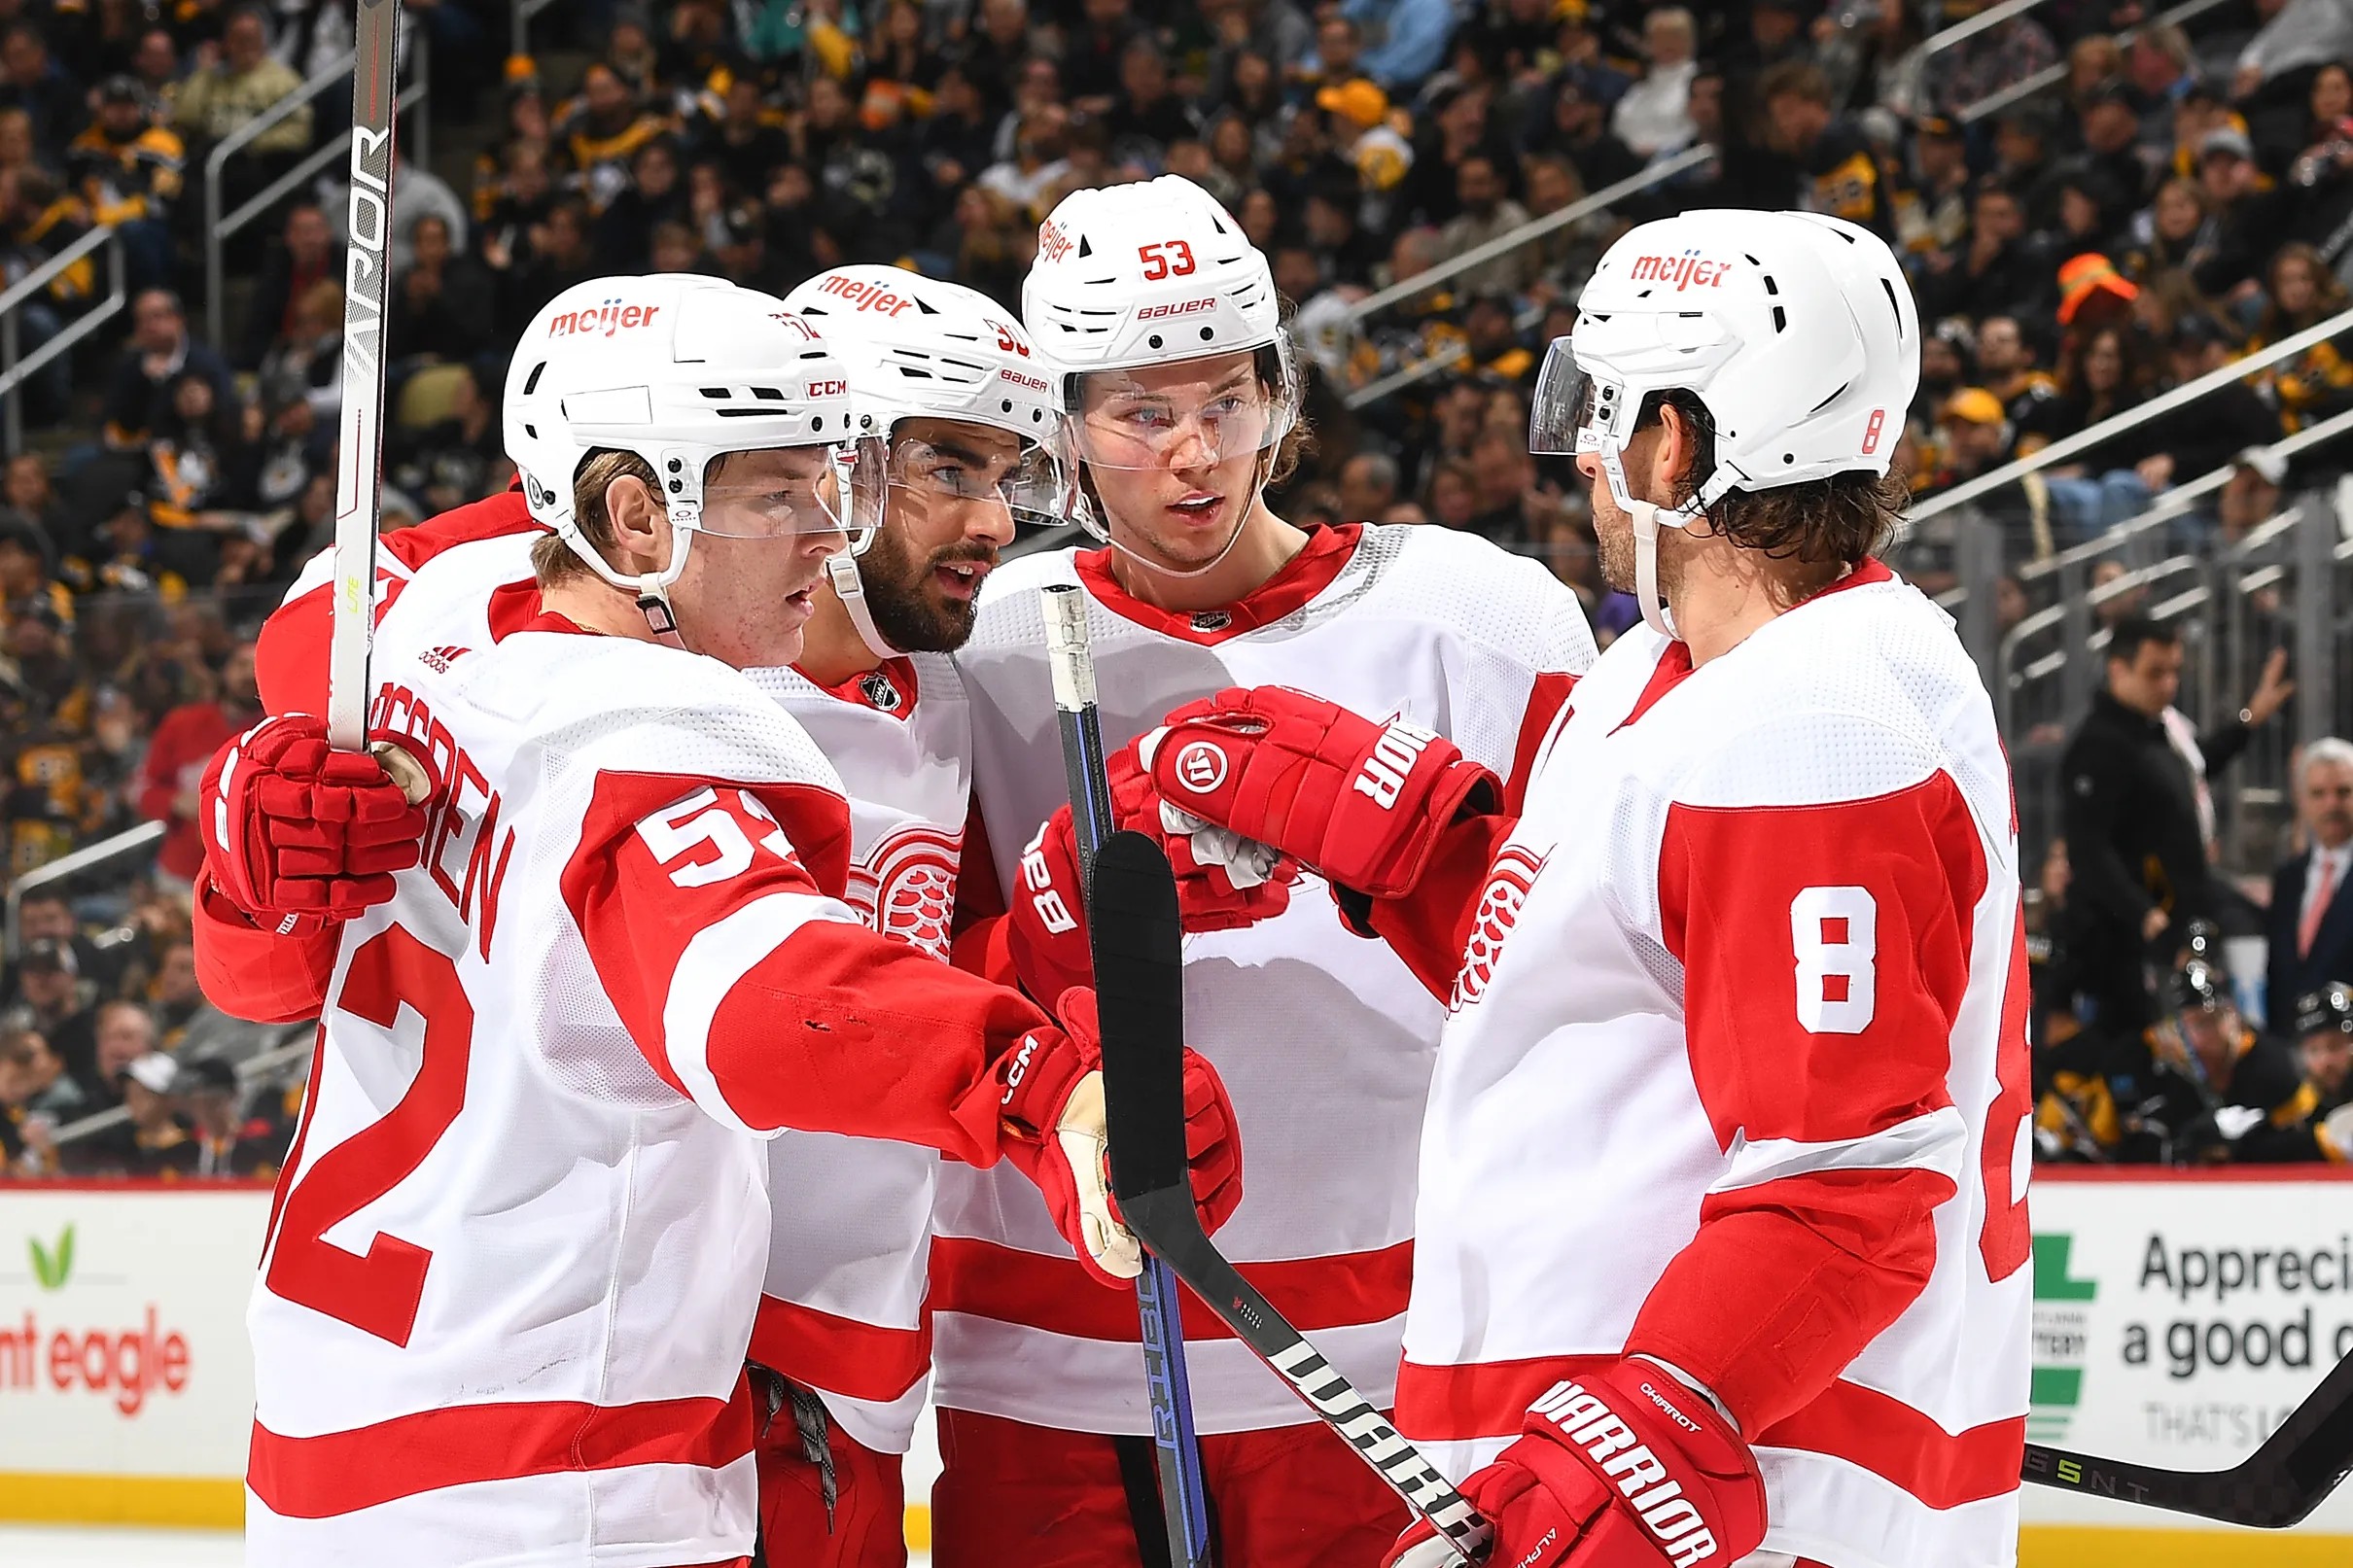 Red Wings earn two points in “griddy” 5-4 comeback win over Penguins